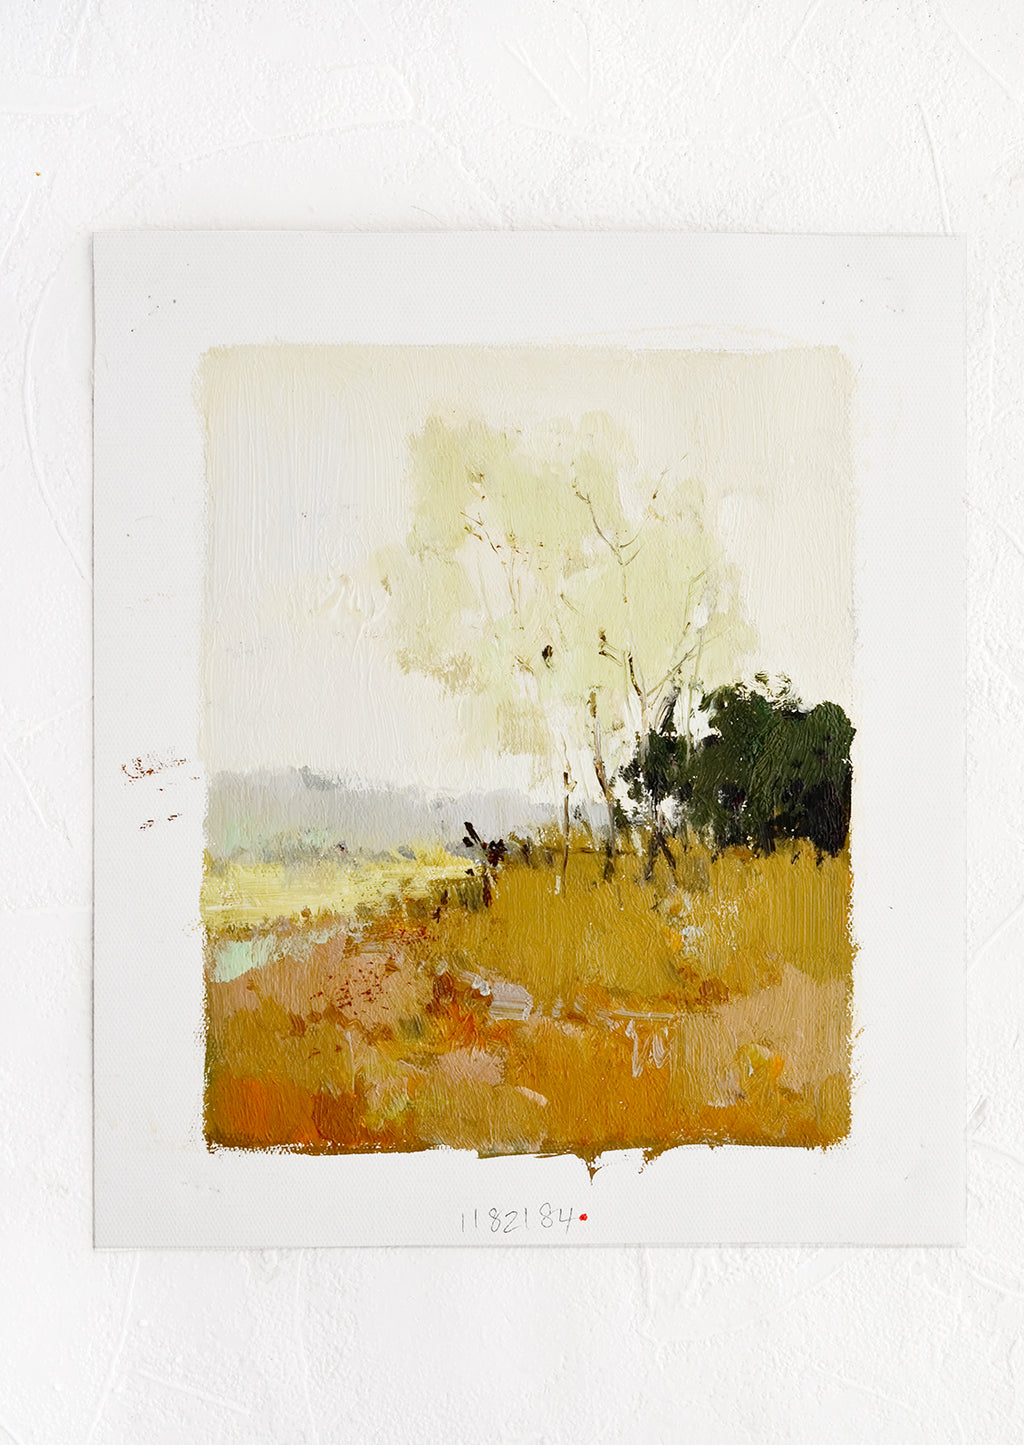 1: An oil painting depicting a landscape scene with a tree in a field.